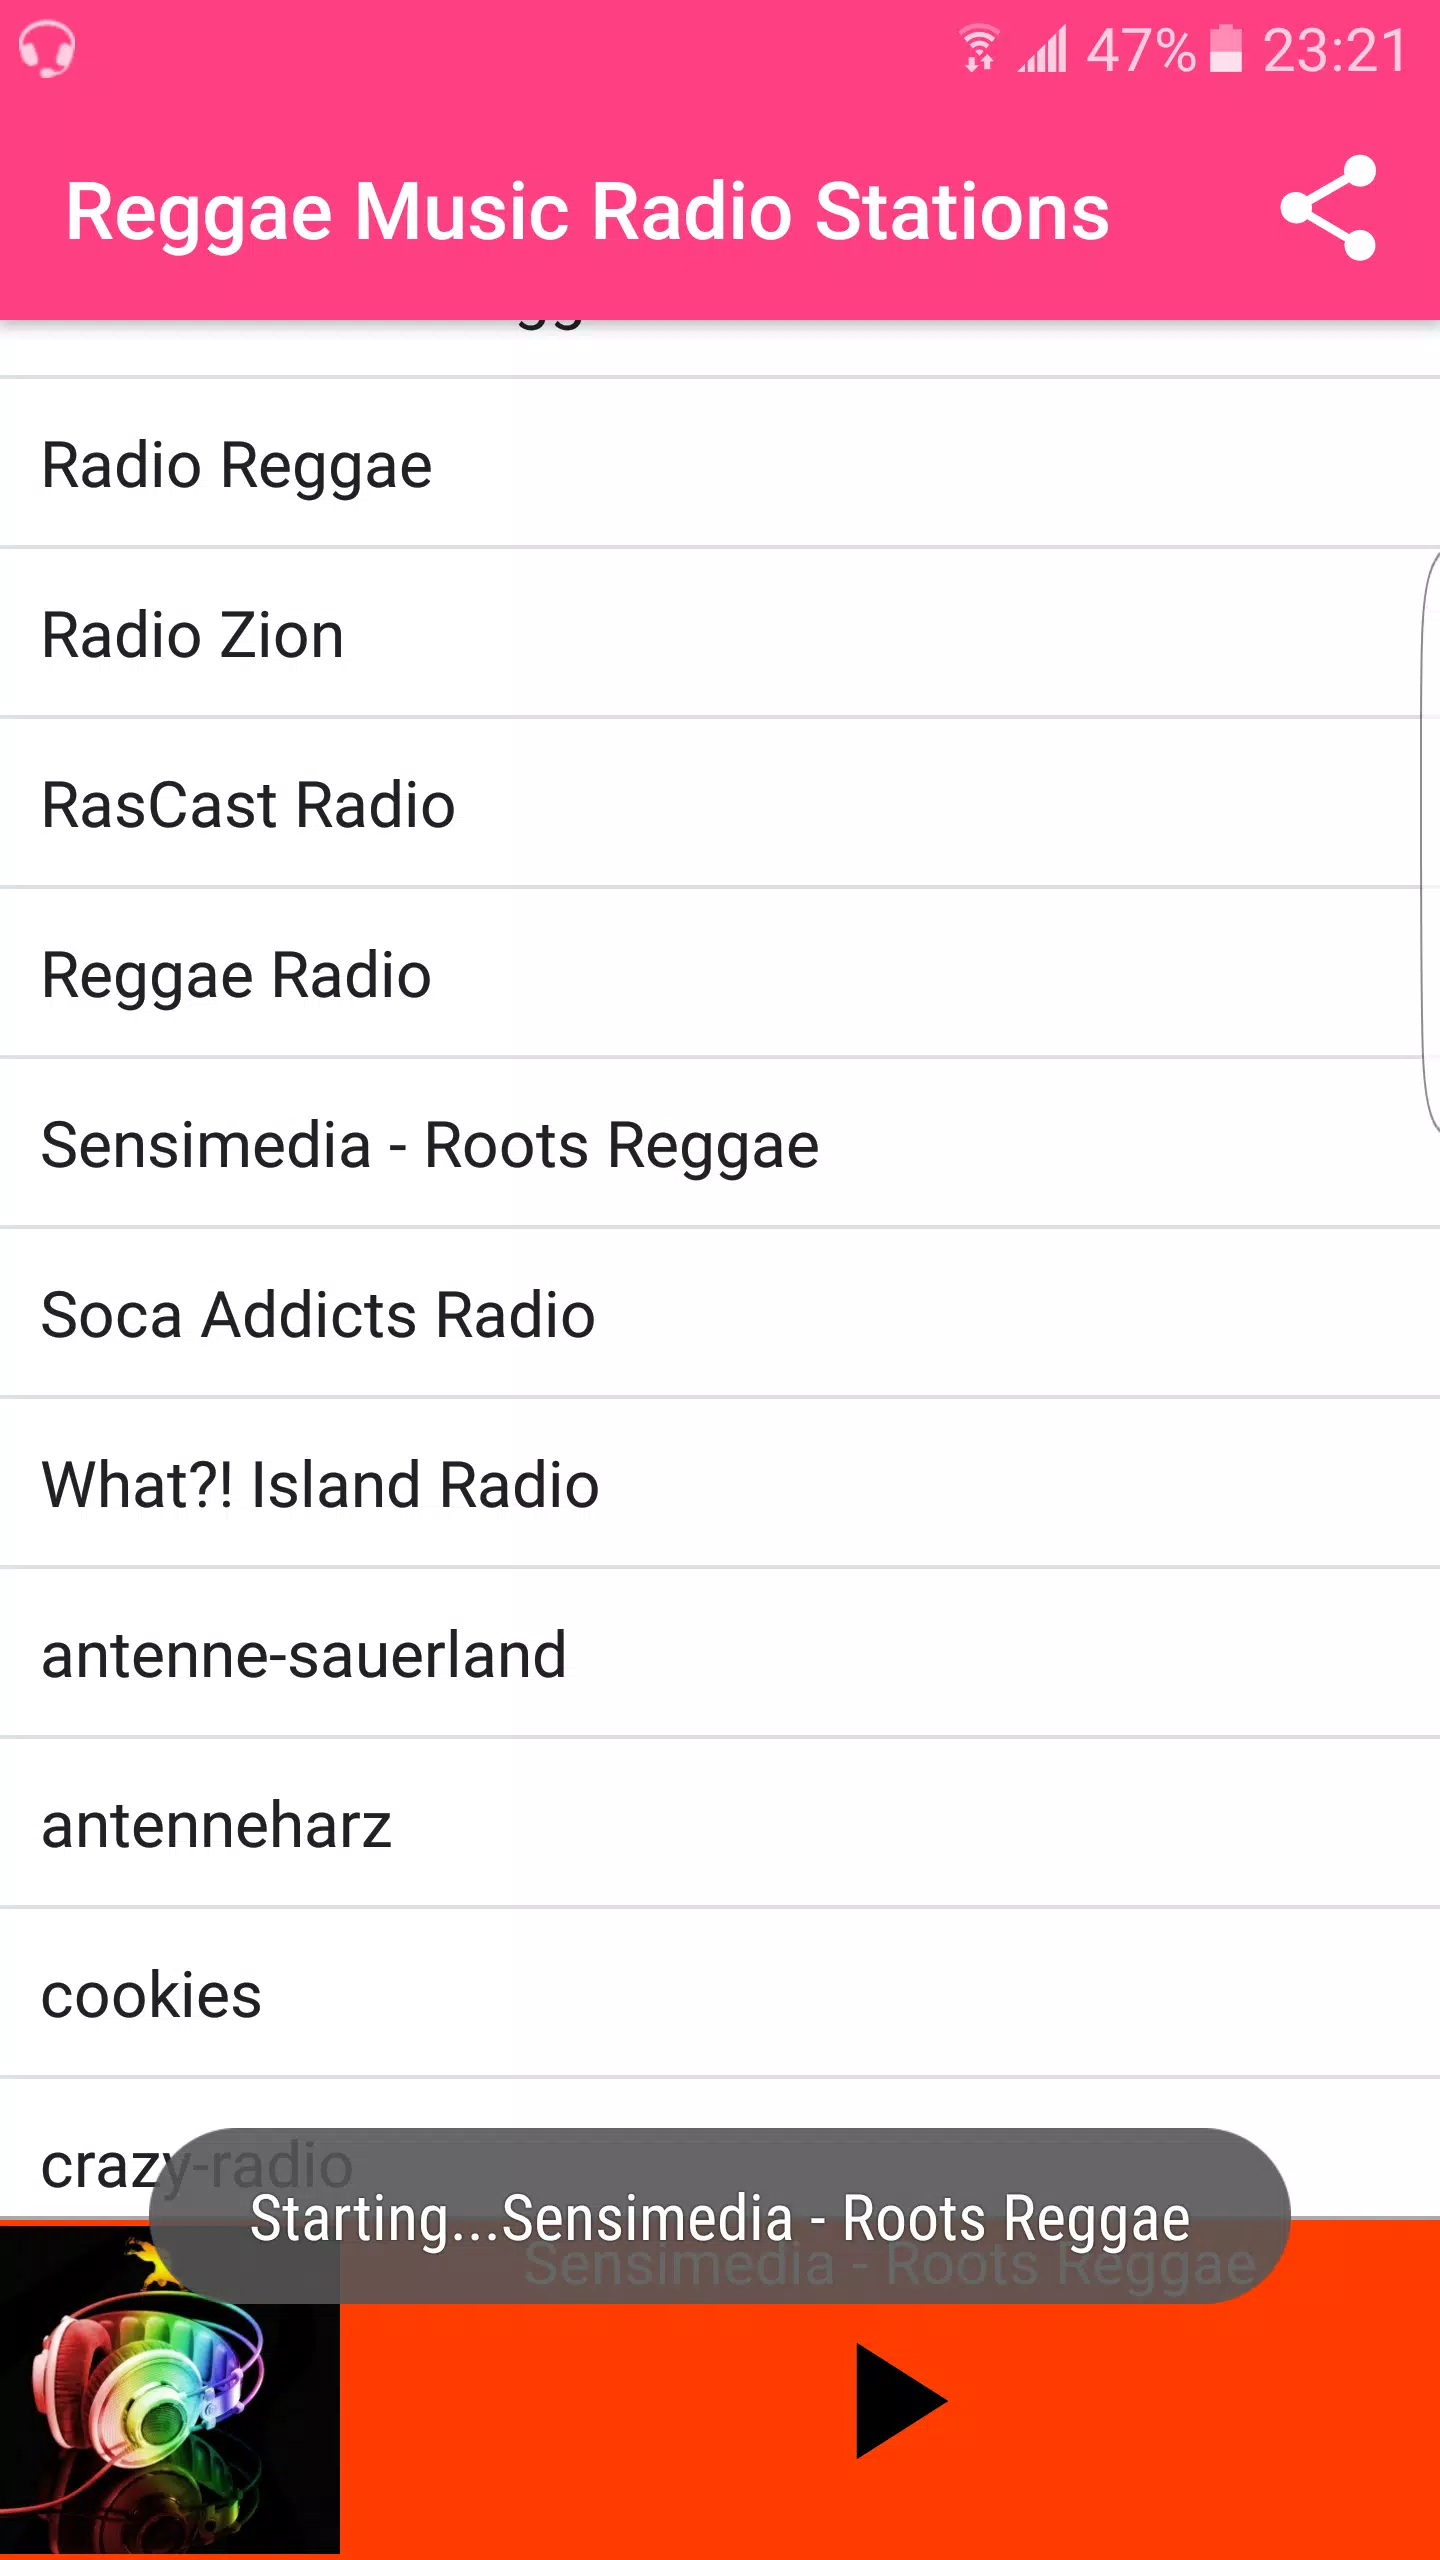 Reggae Music Radio Stations for Android - APK Download